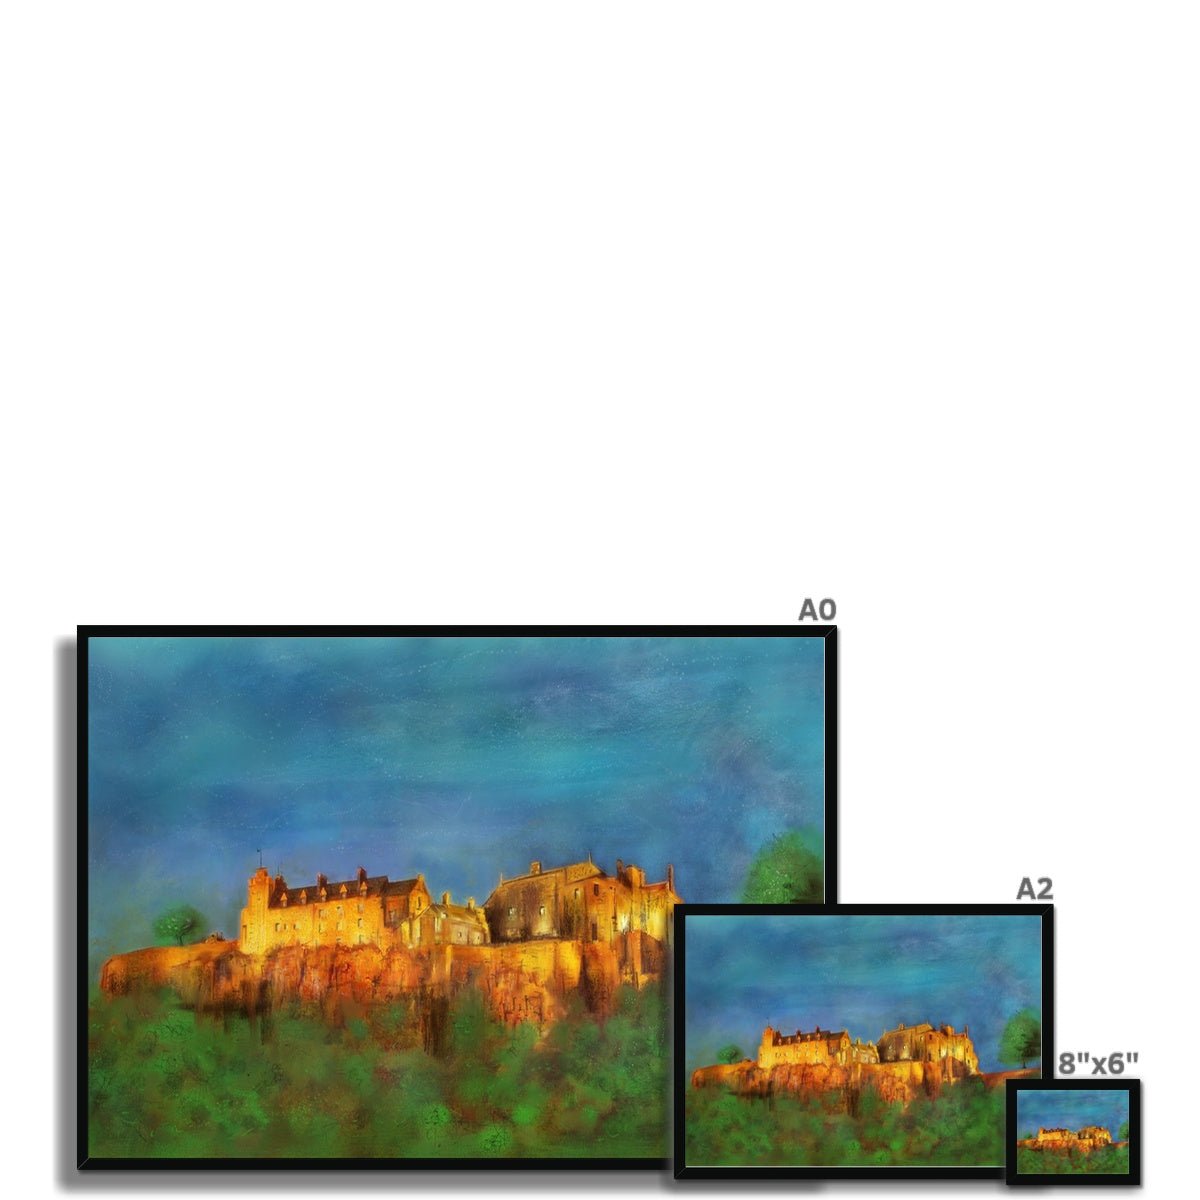 Stirling Castle Painting | Framed Prints From Scotland-Framed Prints-Historic & Iconic Scotland Art Gallery-Paintings, Prints, Homeware, Art Gifts From Scotland By Scottish Artist Kevin Hunter